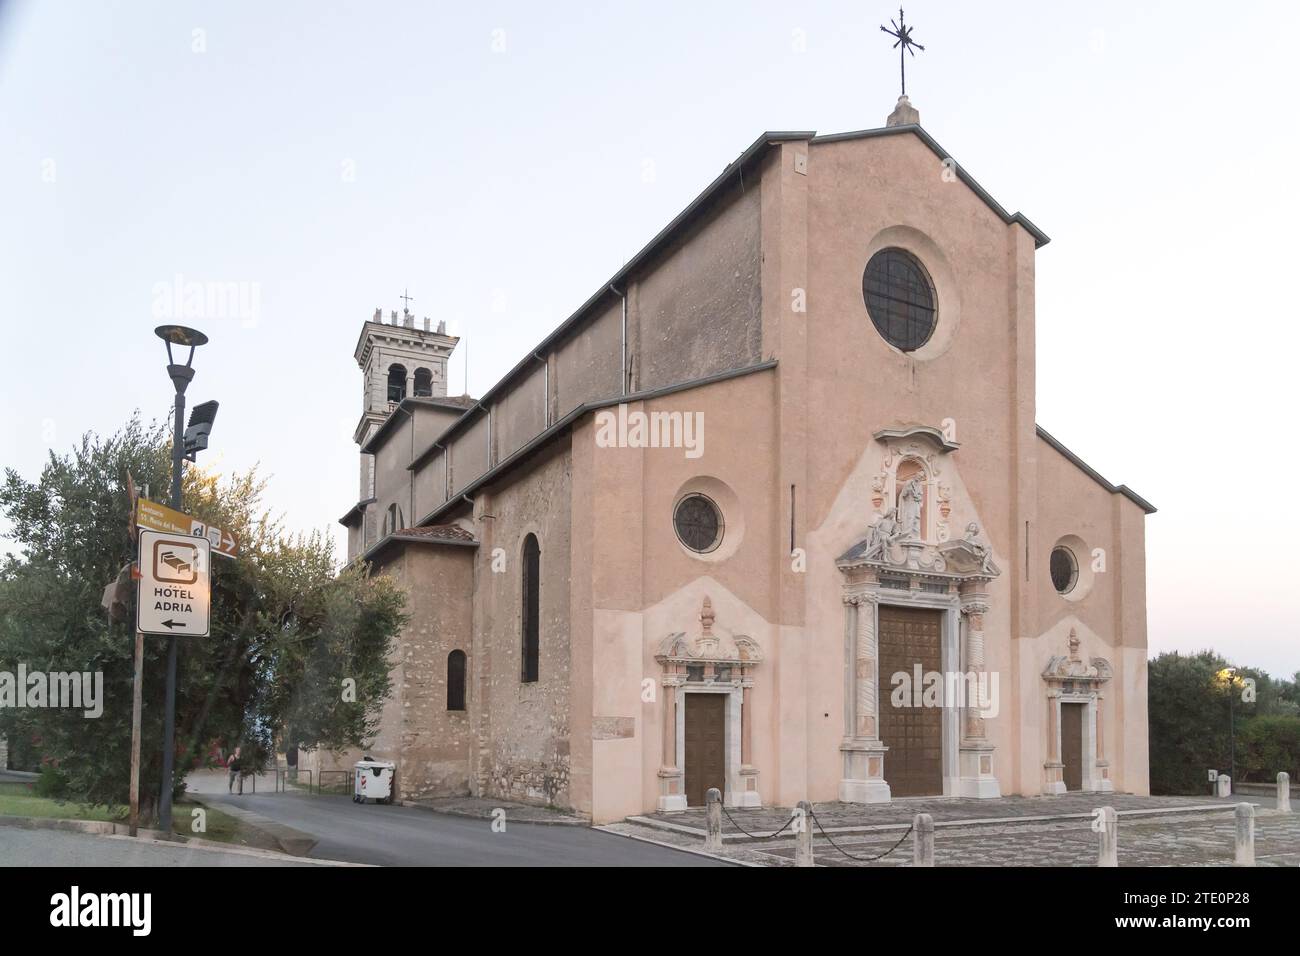 Chiesa dei SS. Pietro e Paolo (Church of Saints Peter and Paul) in Toscolano Maderno, Province of Brescia, Lombardy, Italy © Wojciech Strozyk / Alamy Stock Photo